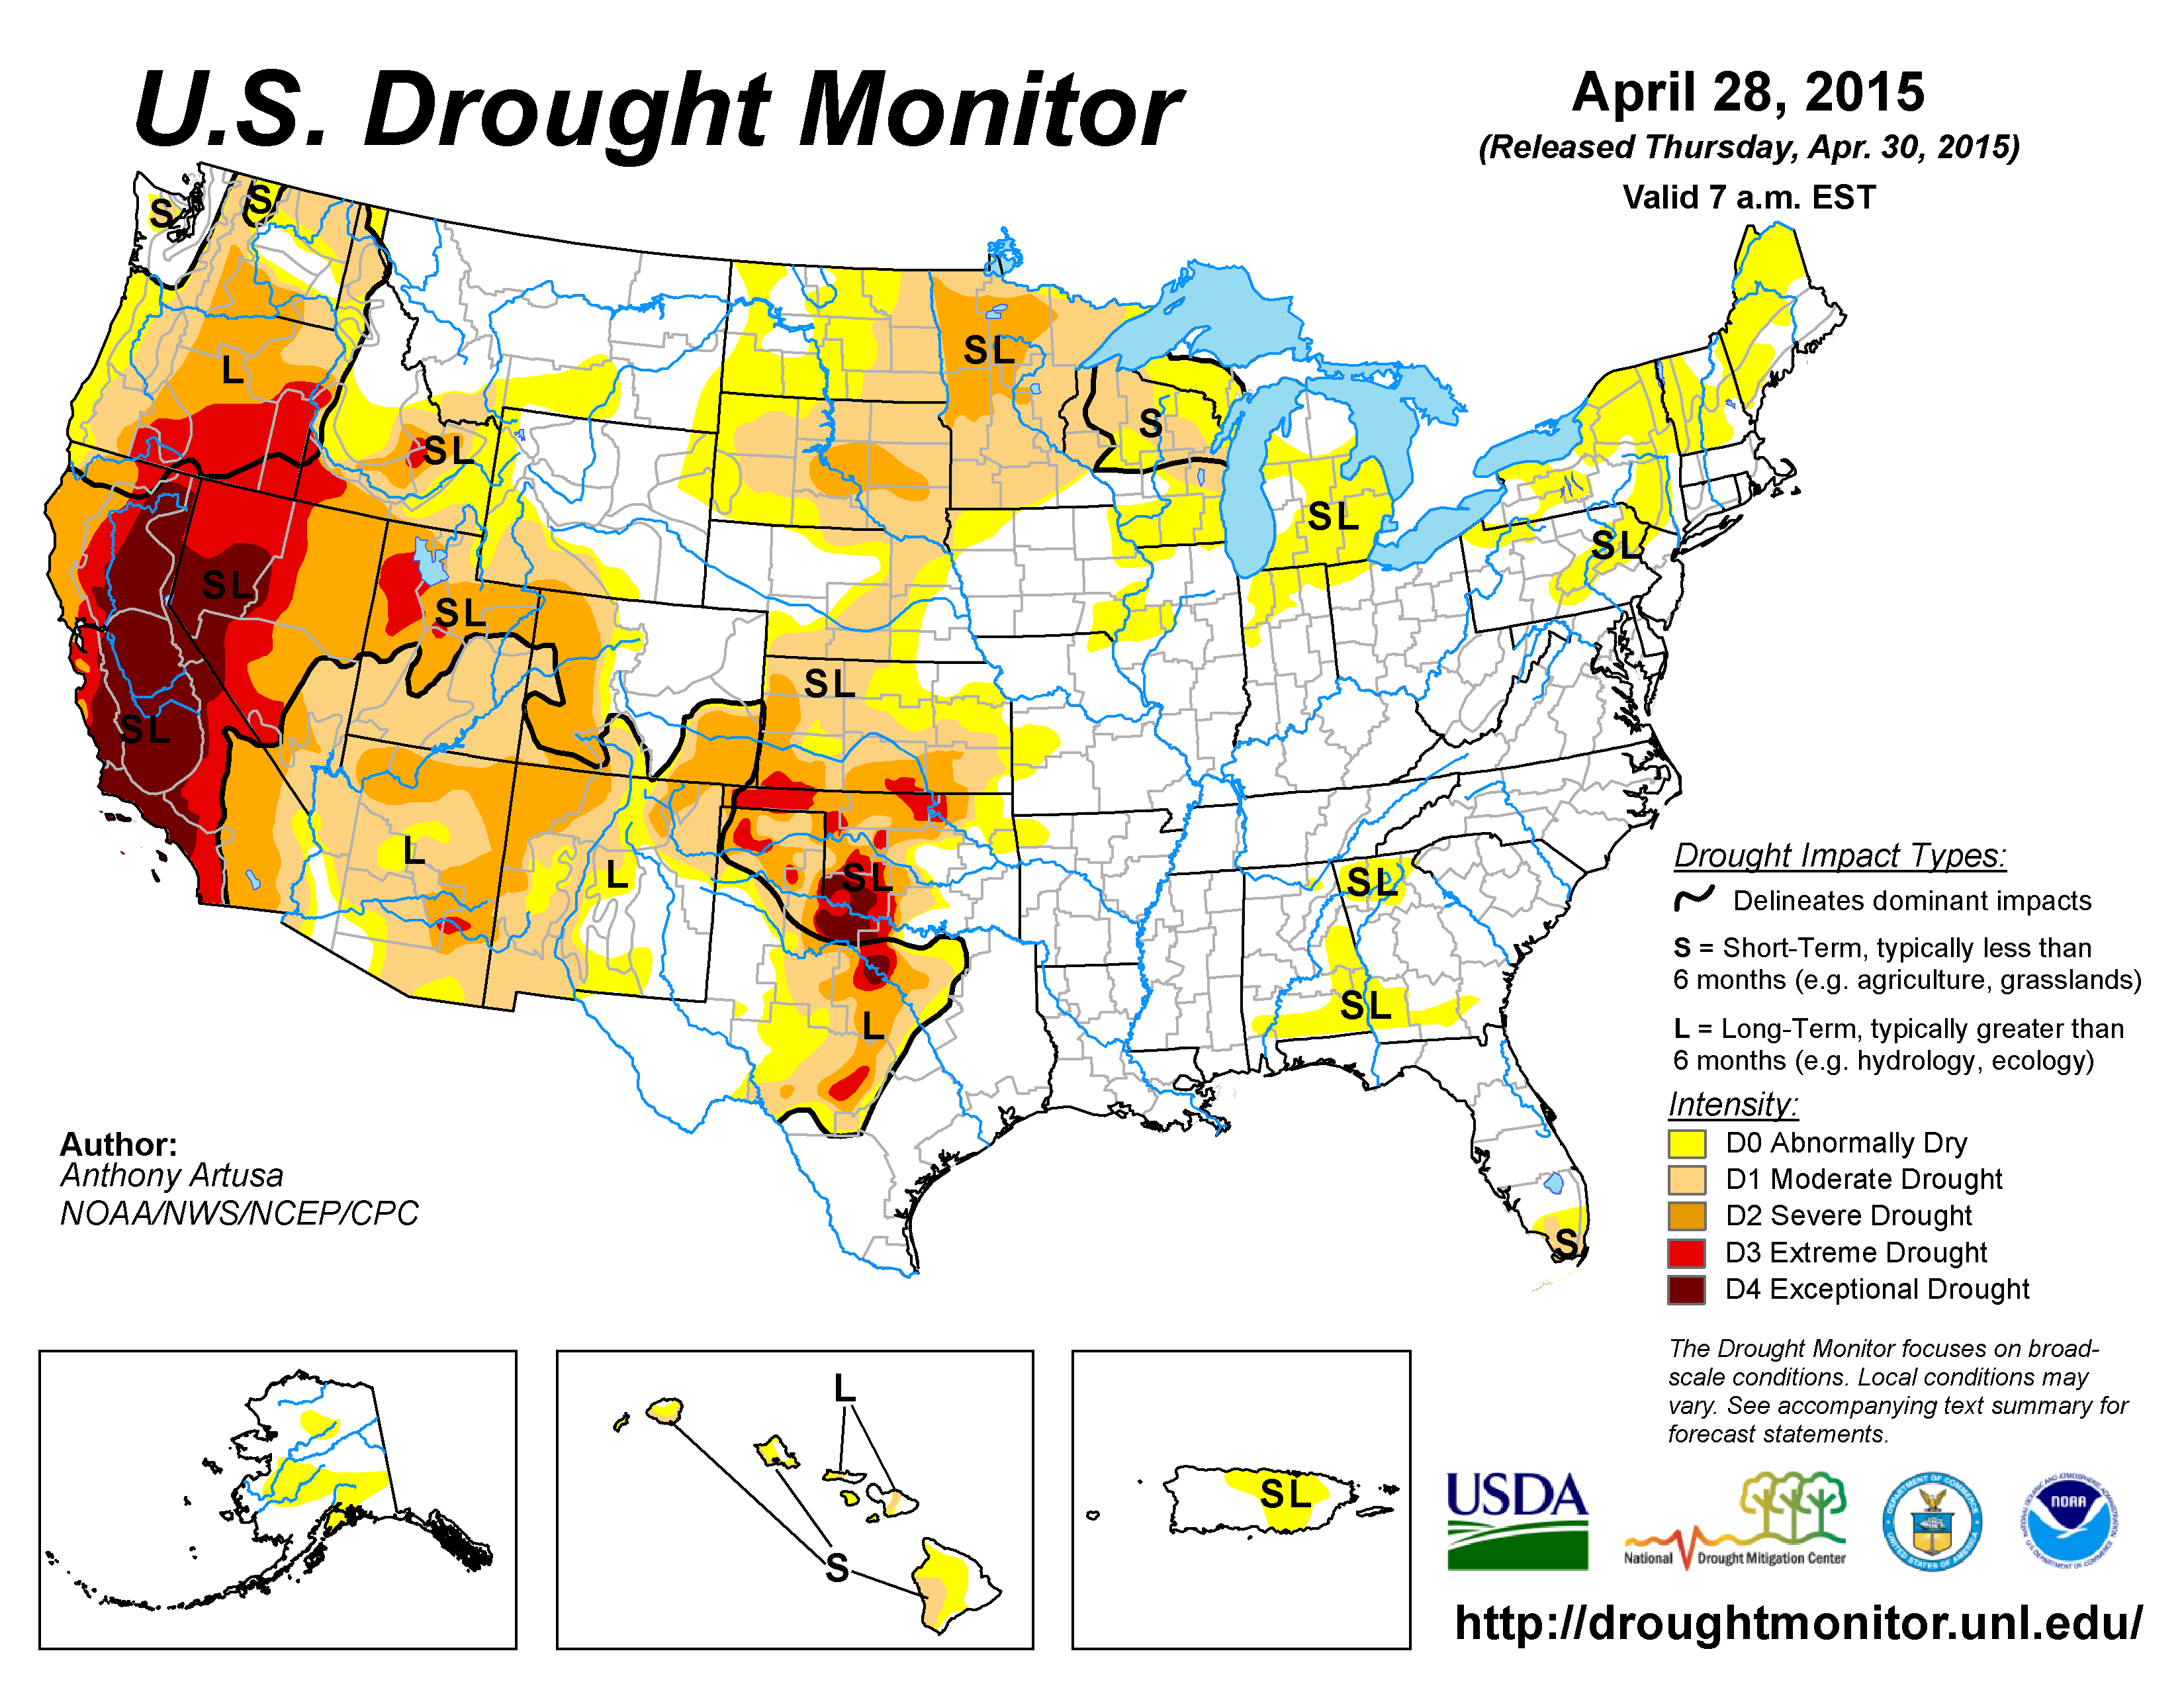 The U.S. Drought Monitor drought map valid April 28, 2015